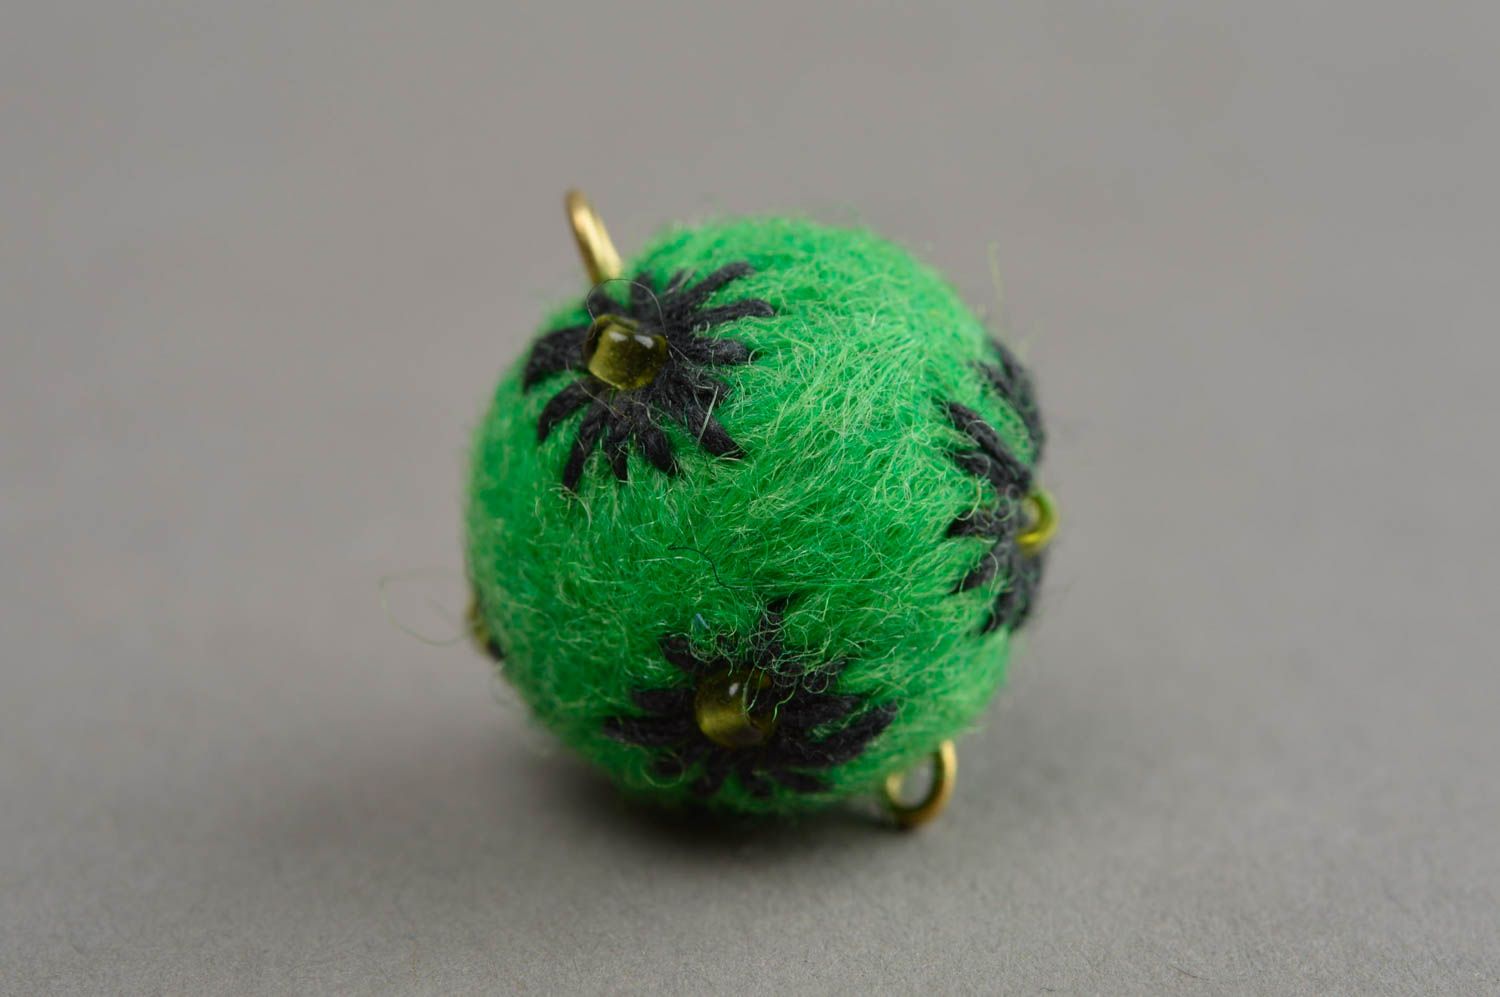 Handmade felted wool ball pendant diy jewelry making ideas gifts for her photo 4